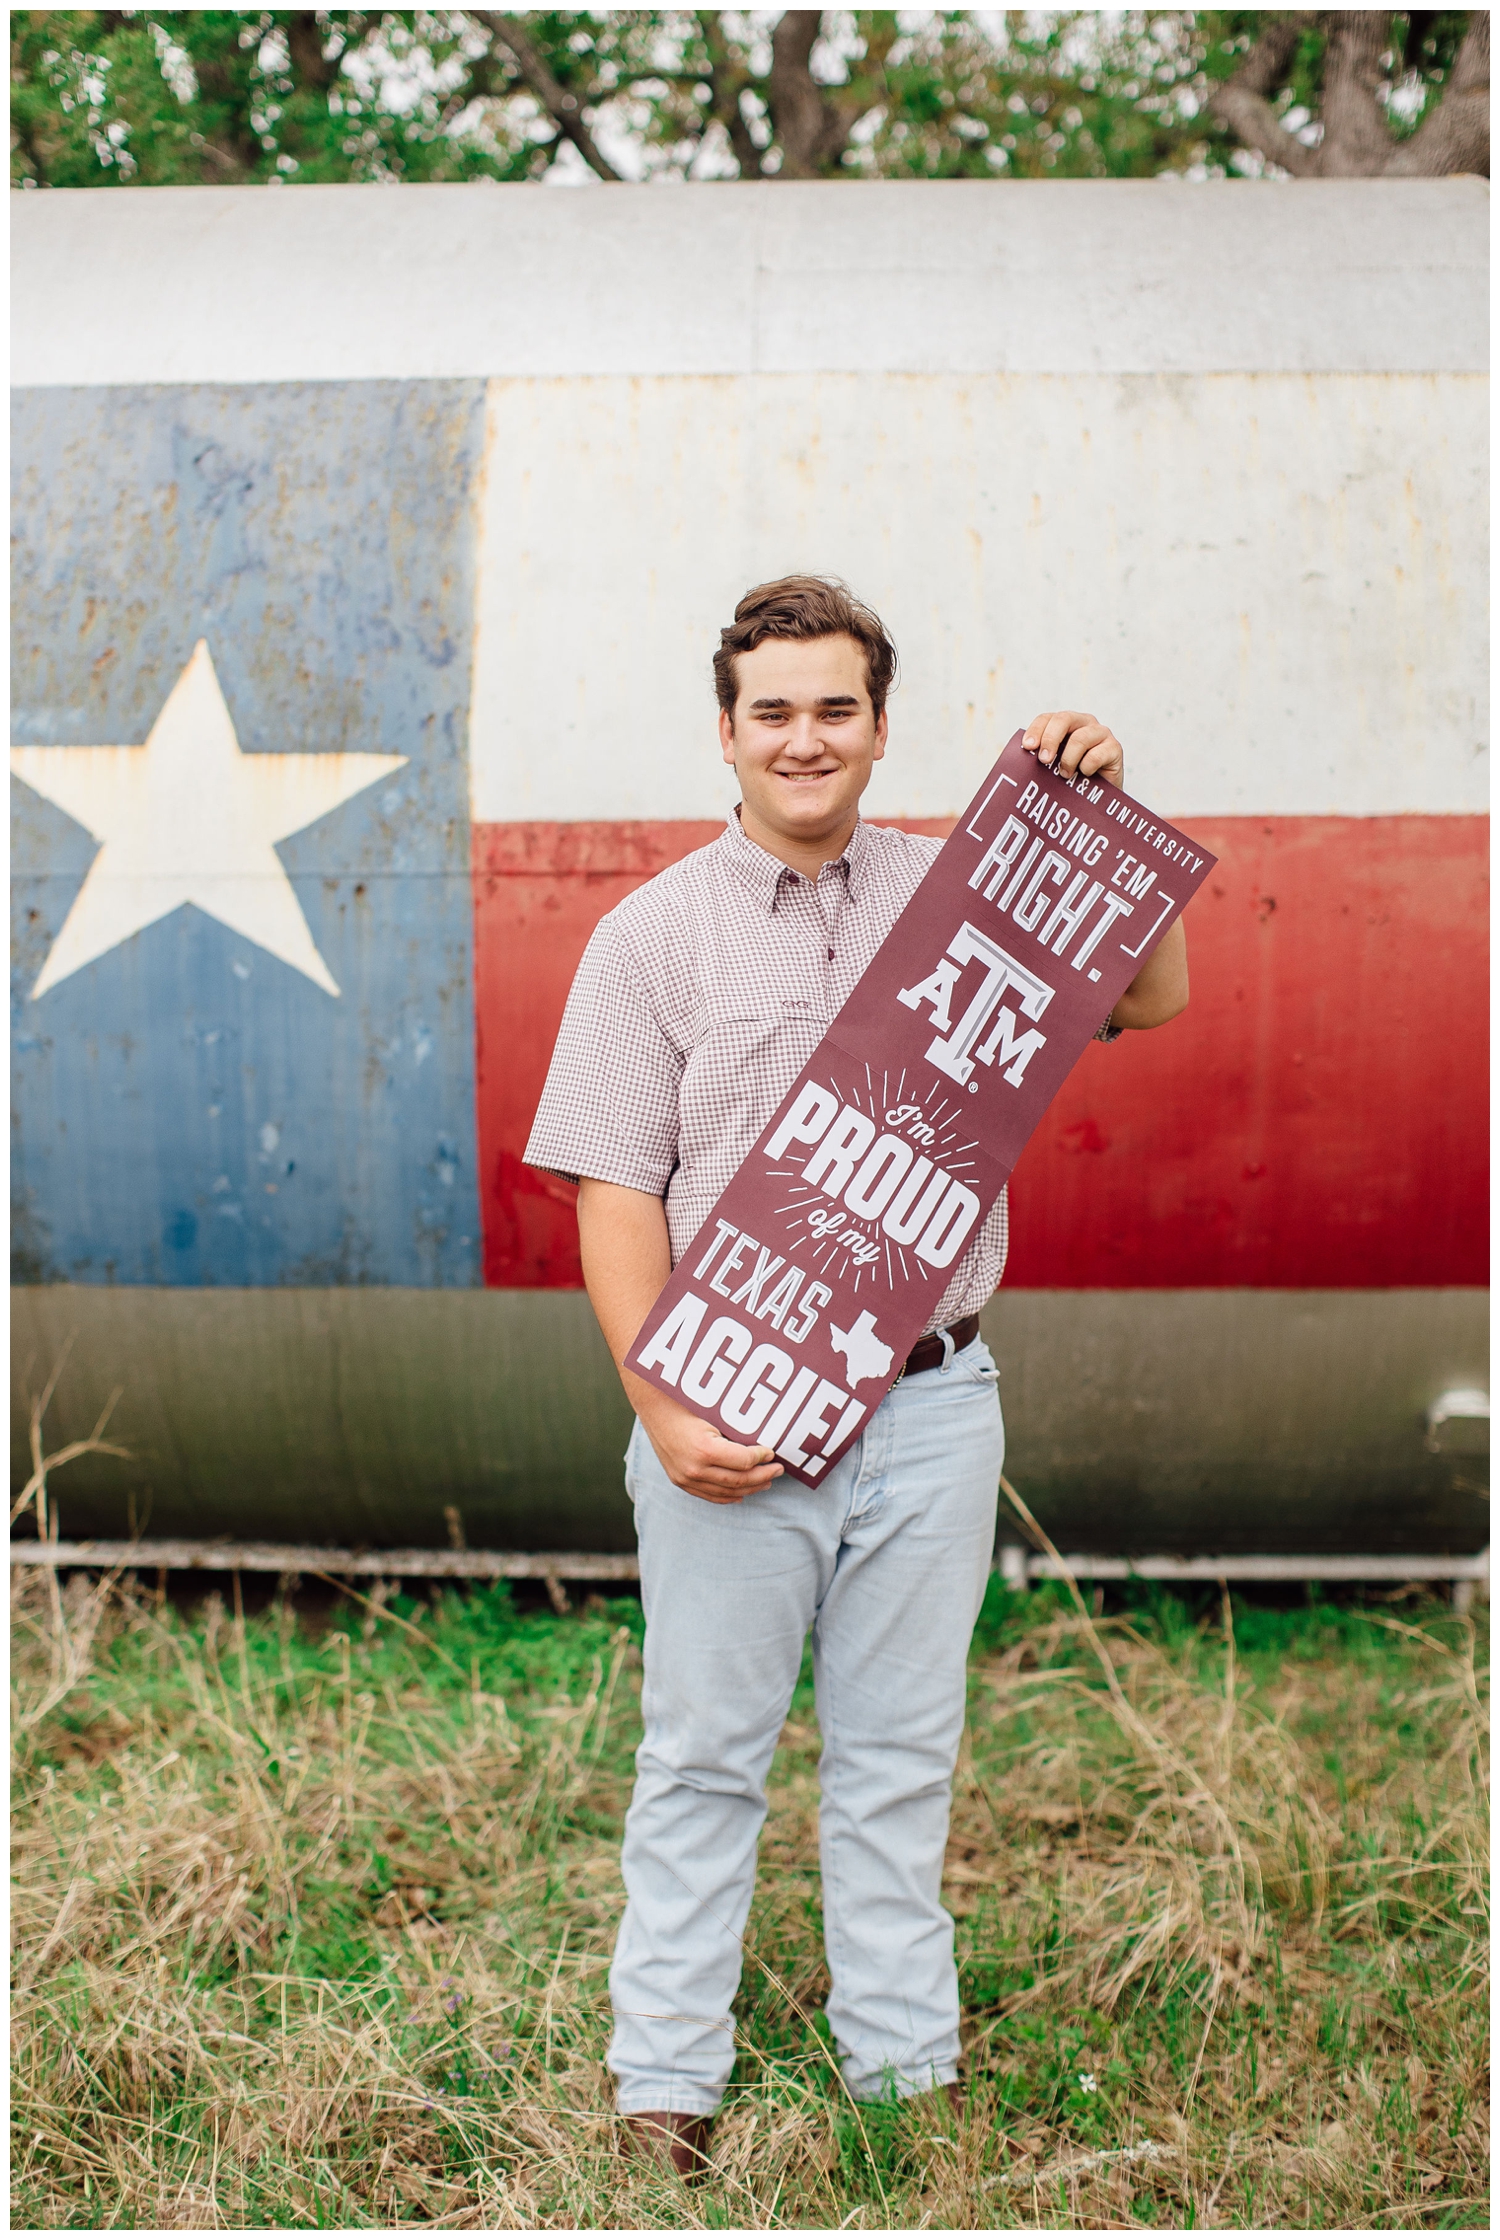 high school senior boy in jeans and plaid shirt holding Texas Aggie sign in front of lone star barrel